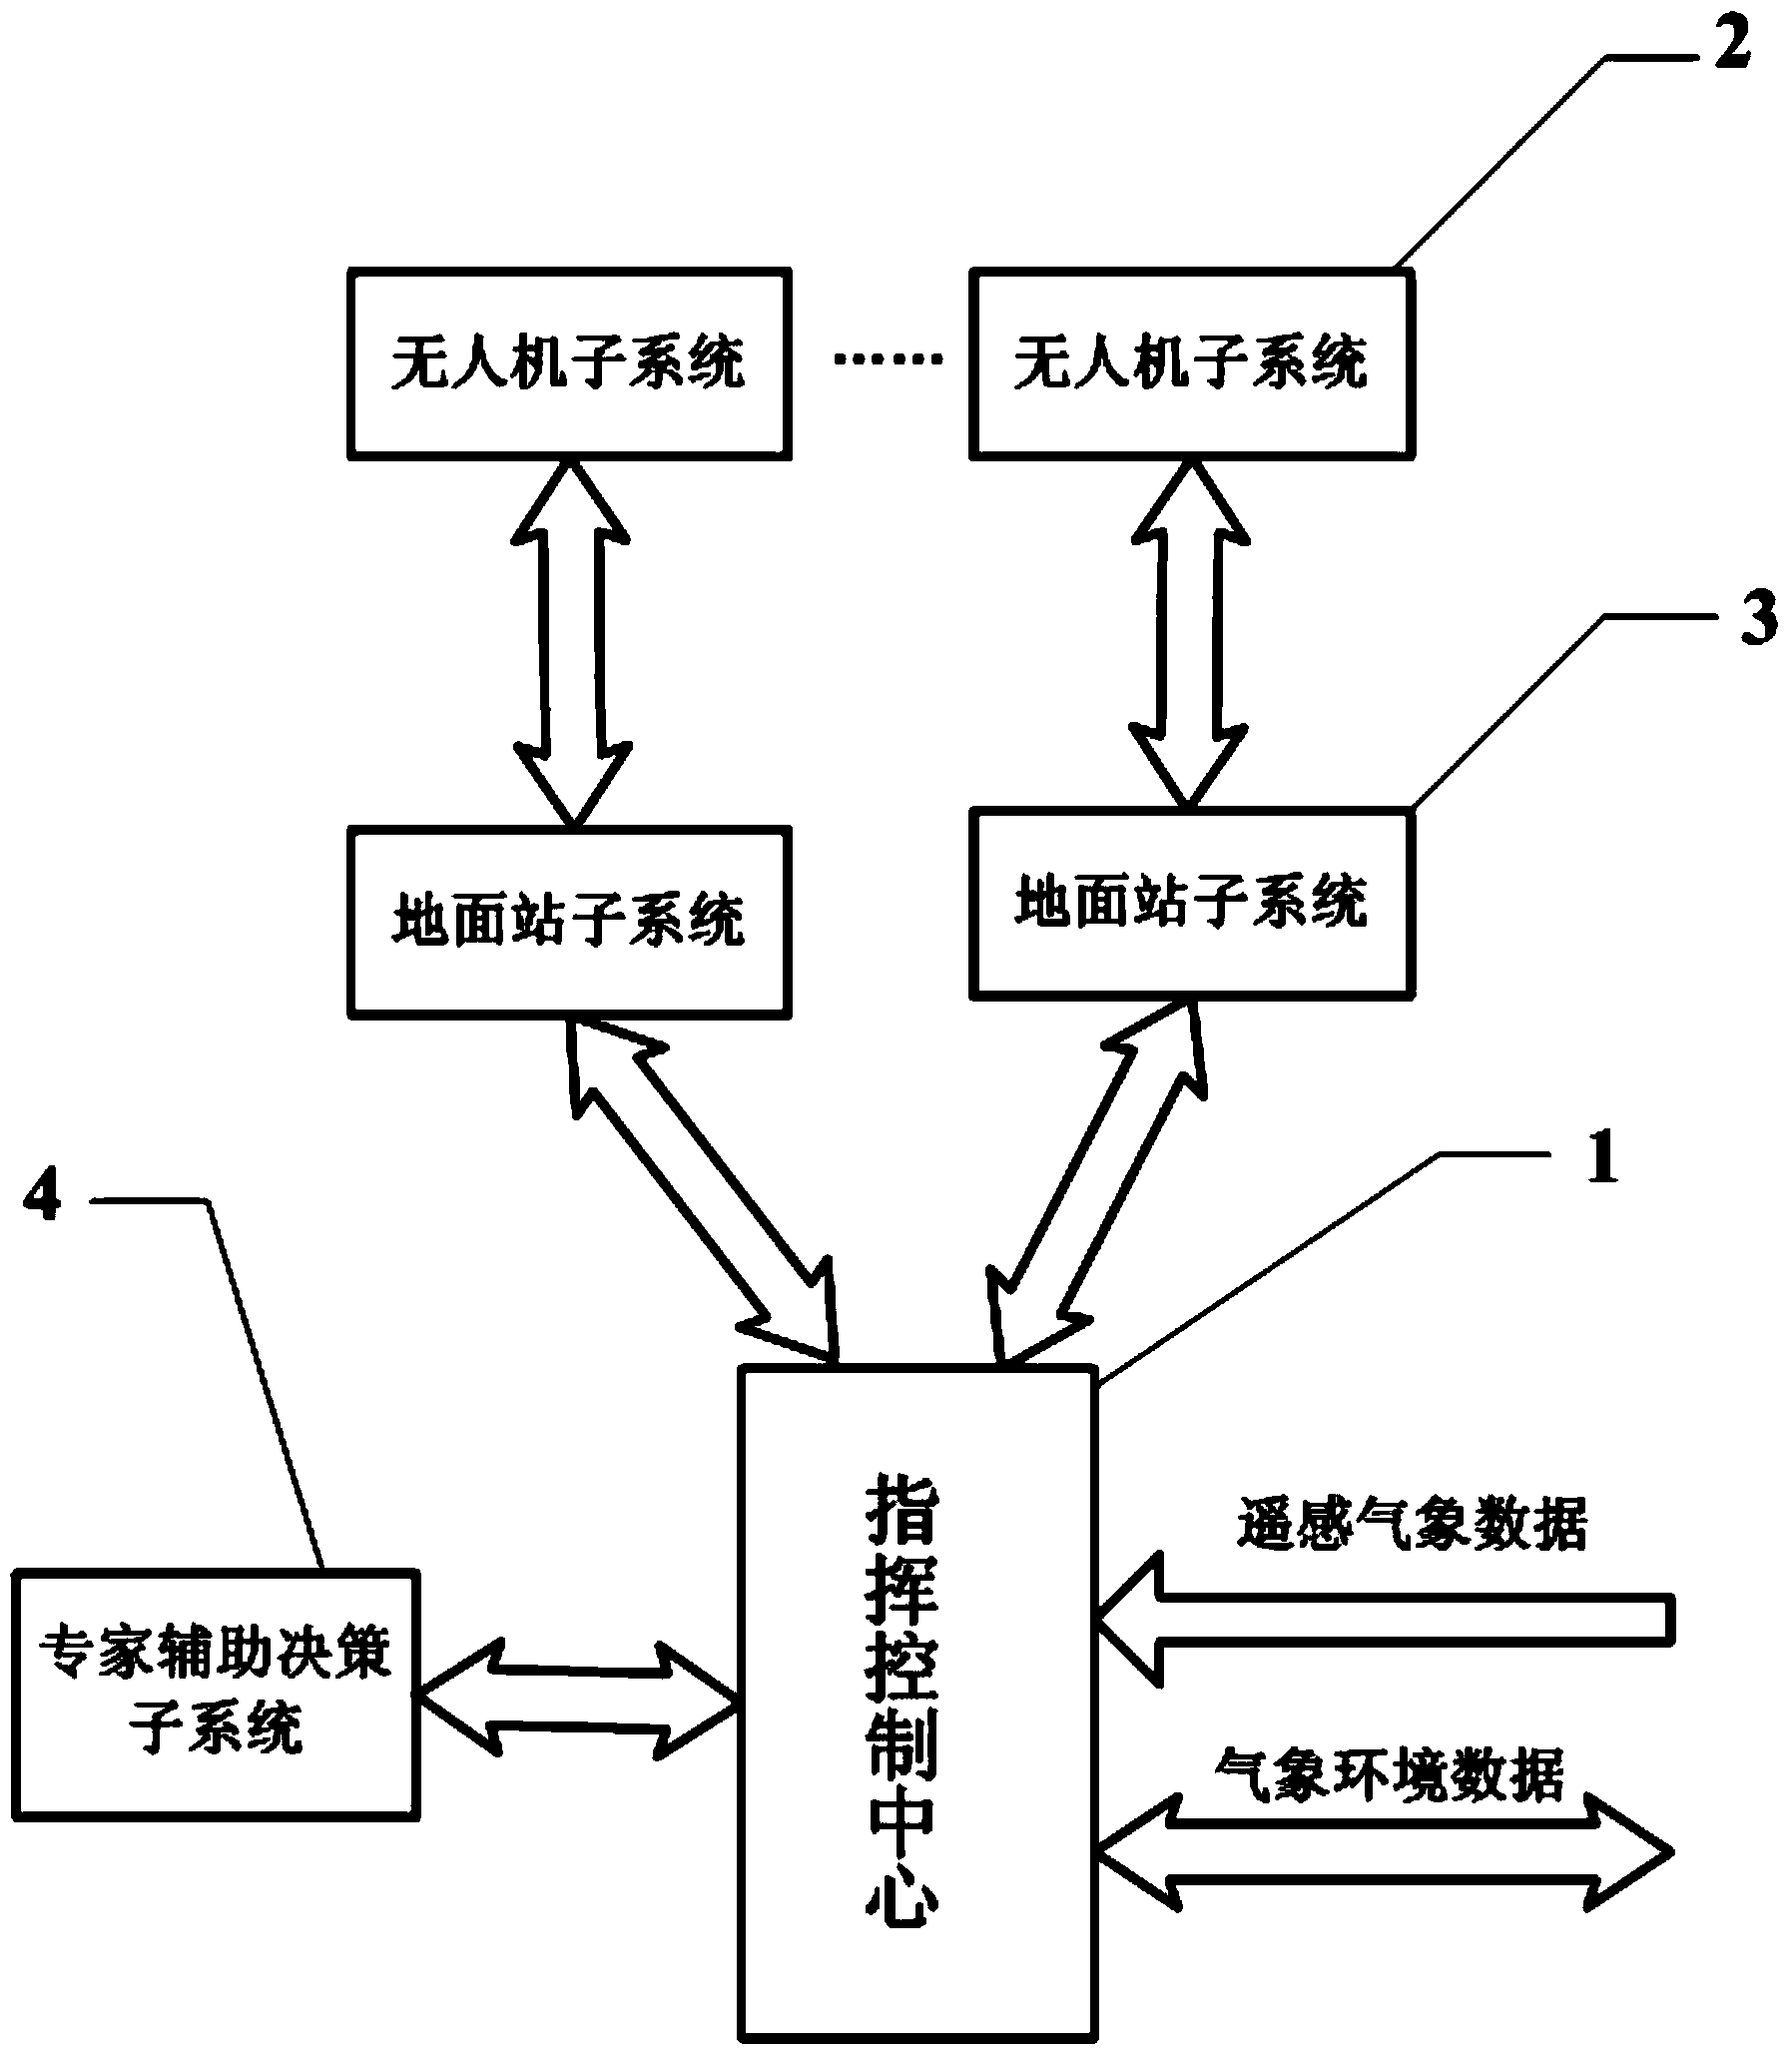 Artificial influence weather detection operating integrated system